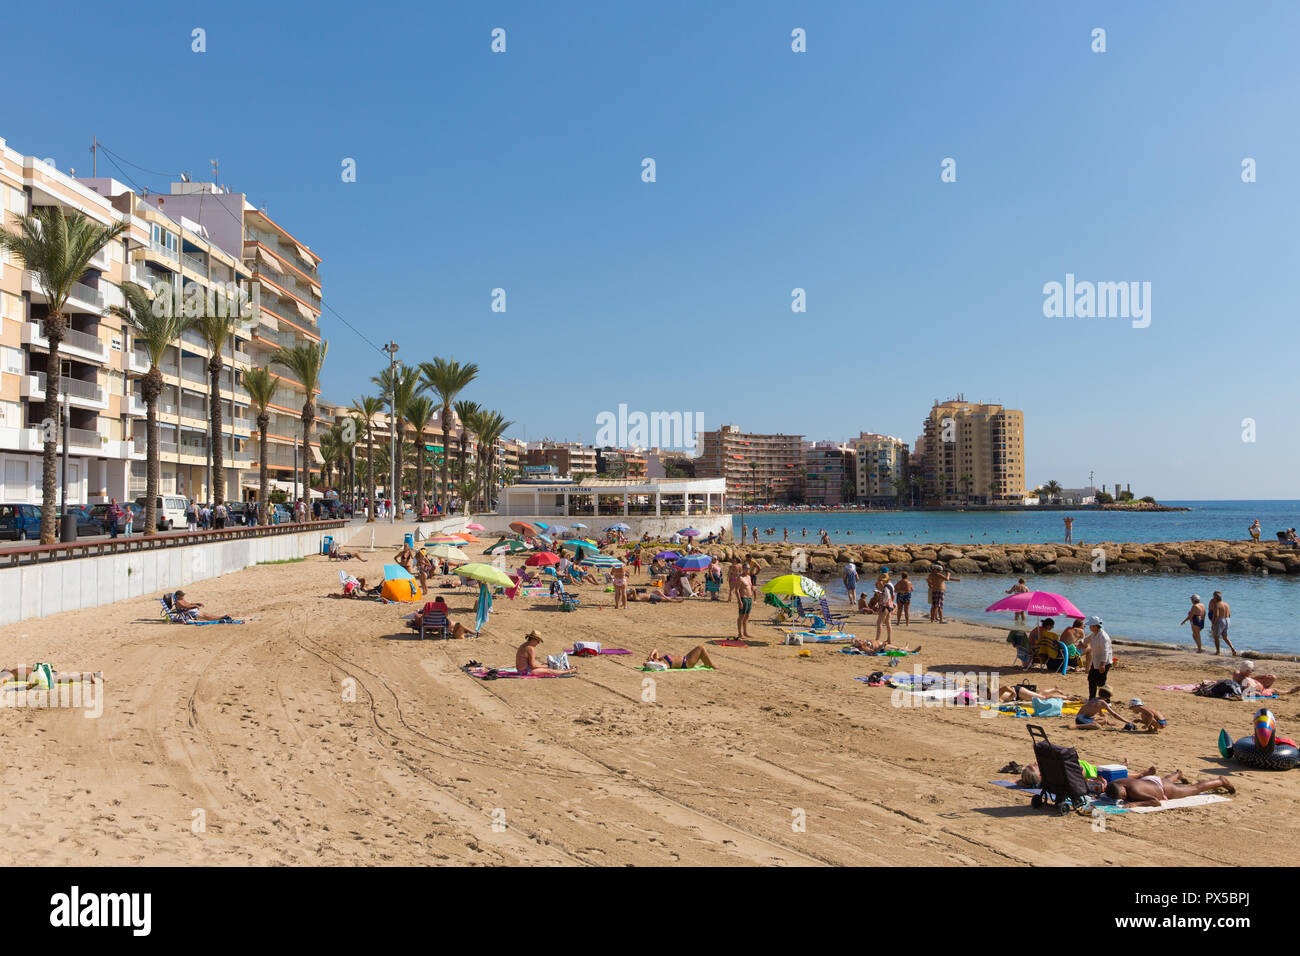 Spanish Sunshine Torrevieja Beach In October With People Enjoying The Sea Sand And Weather Stock Photo Alamy